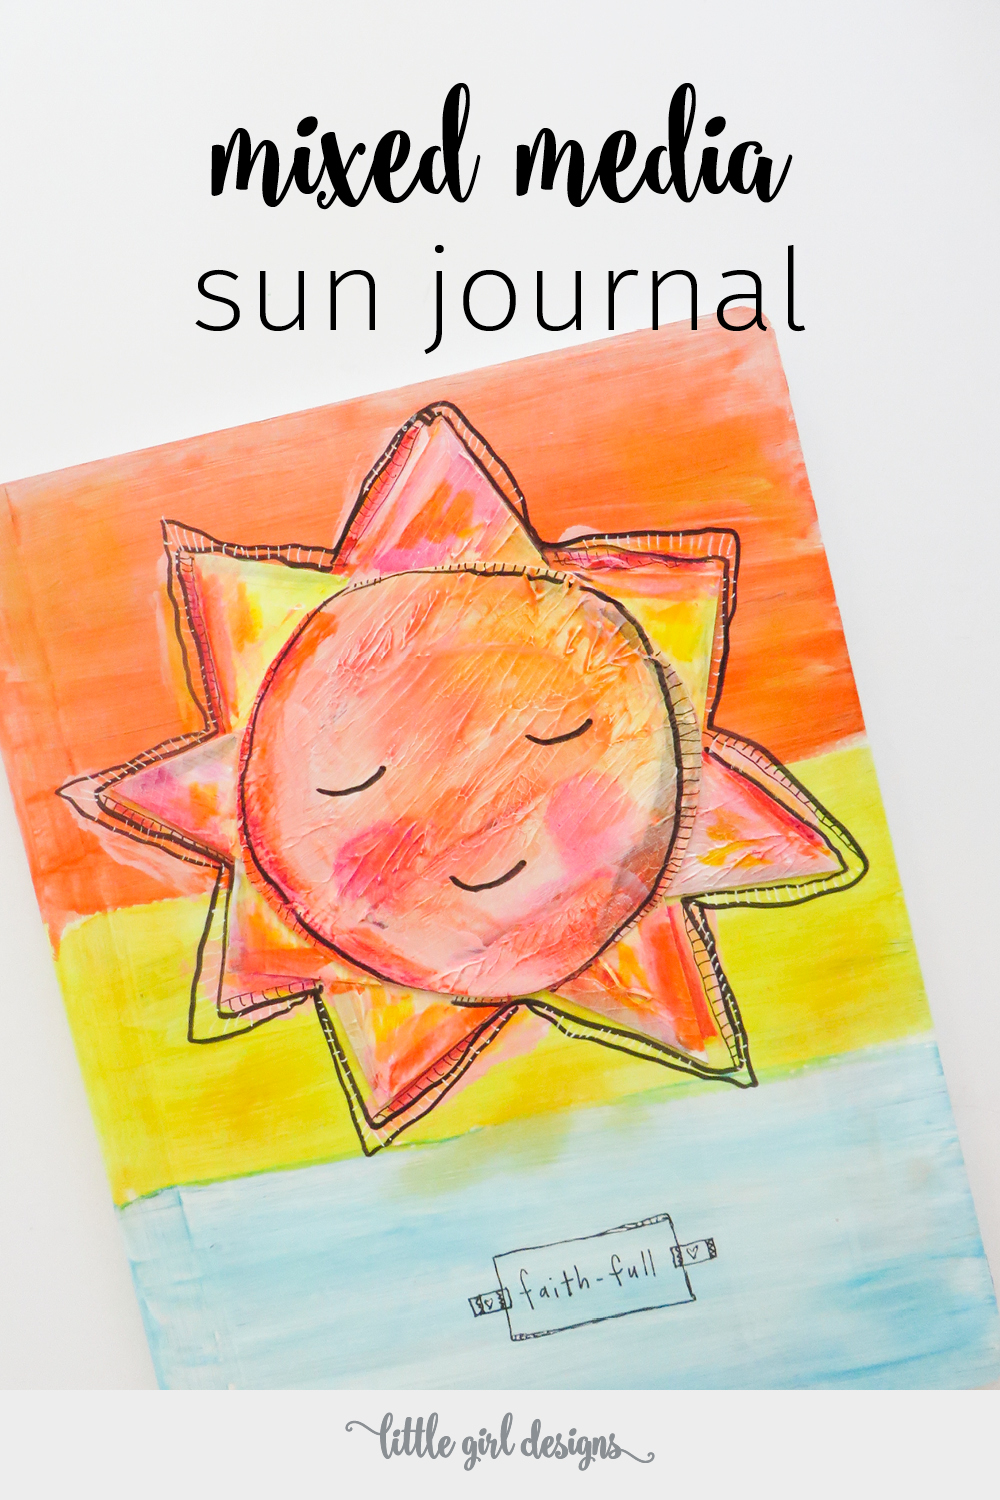 Make this cute mixed media sun journal using DecoArt paint, decoupage glue, painted papers, and a composition book. :)